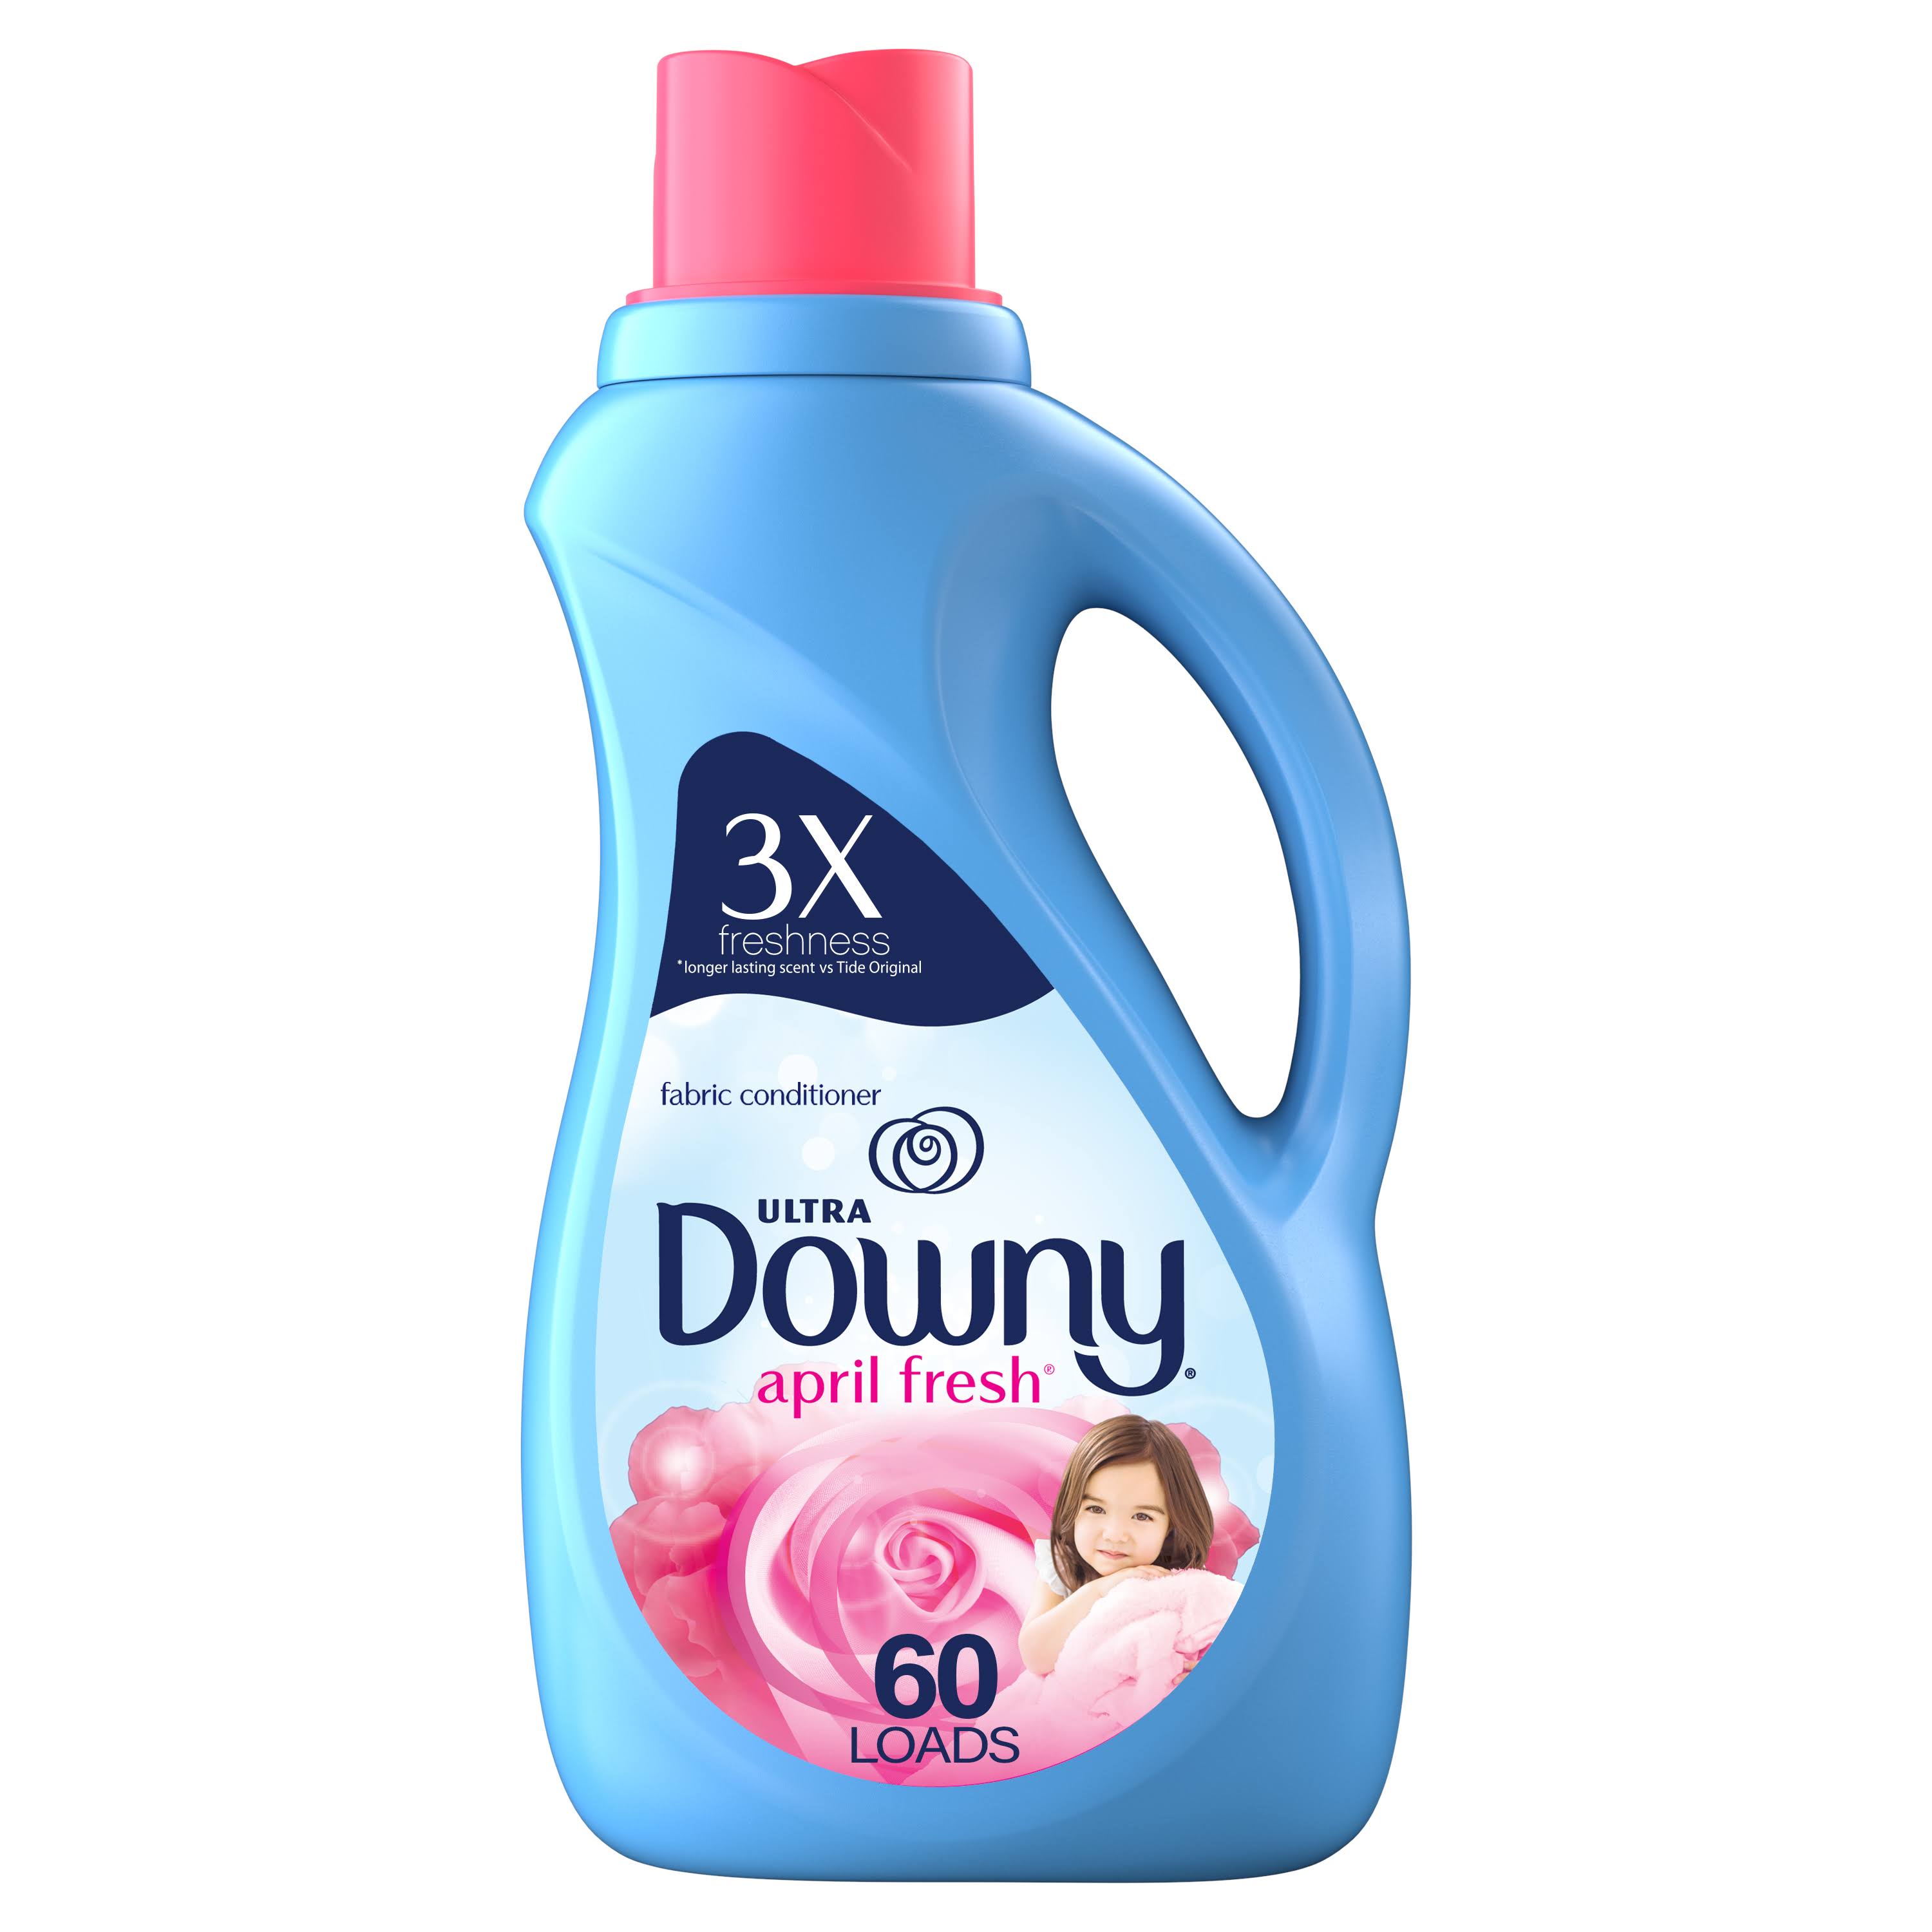 Downy Ultra Fabric Protect Fabric Conditioner - April Fresh, 60 loads, 51oz